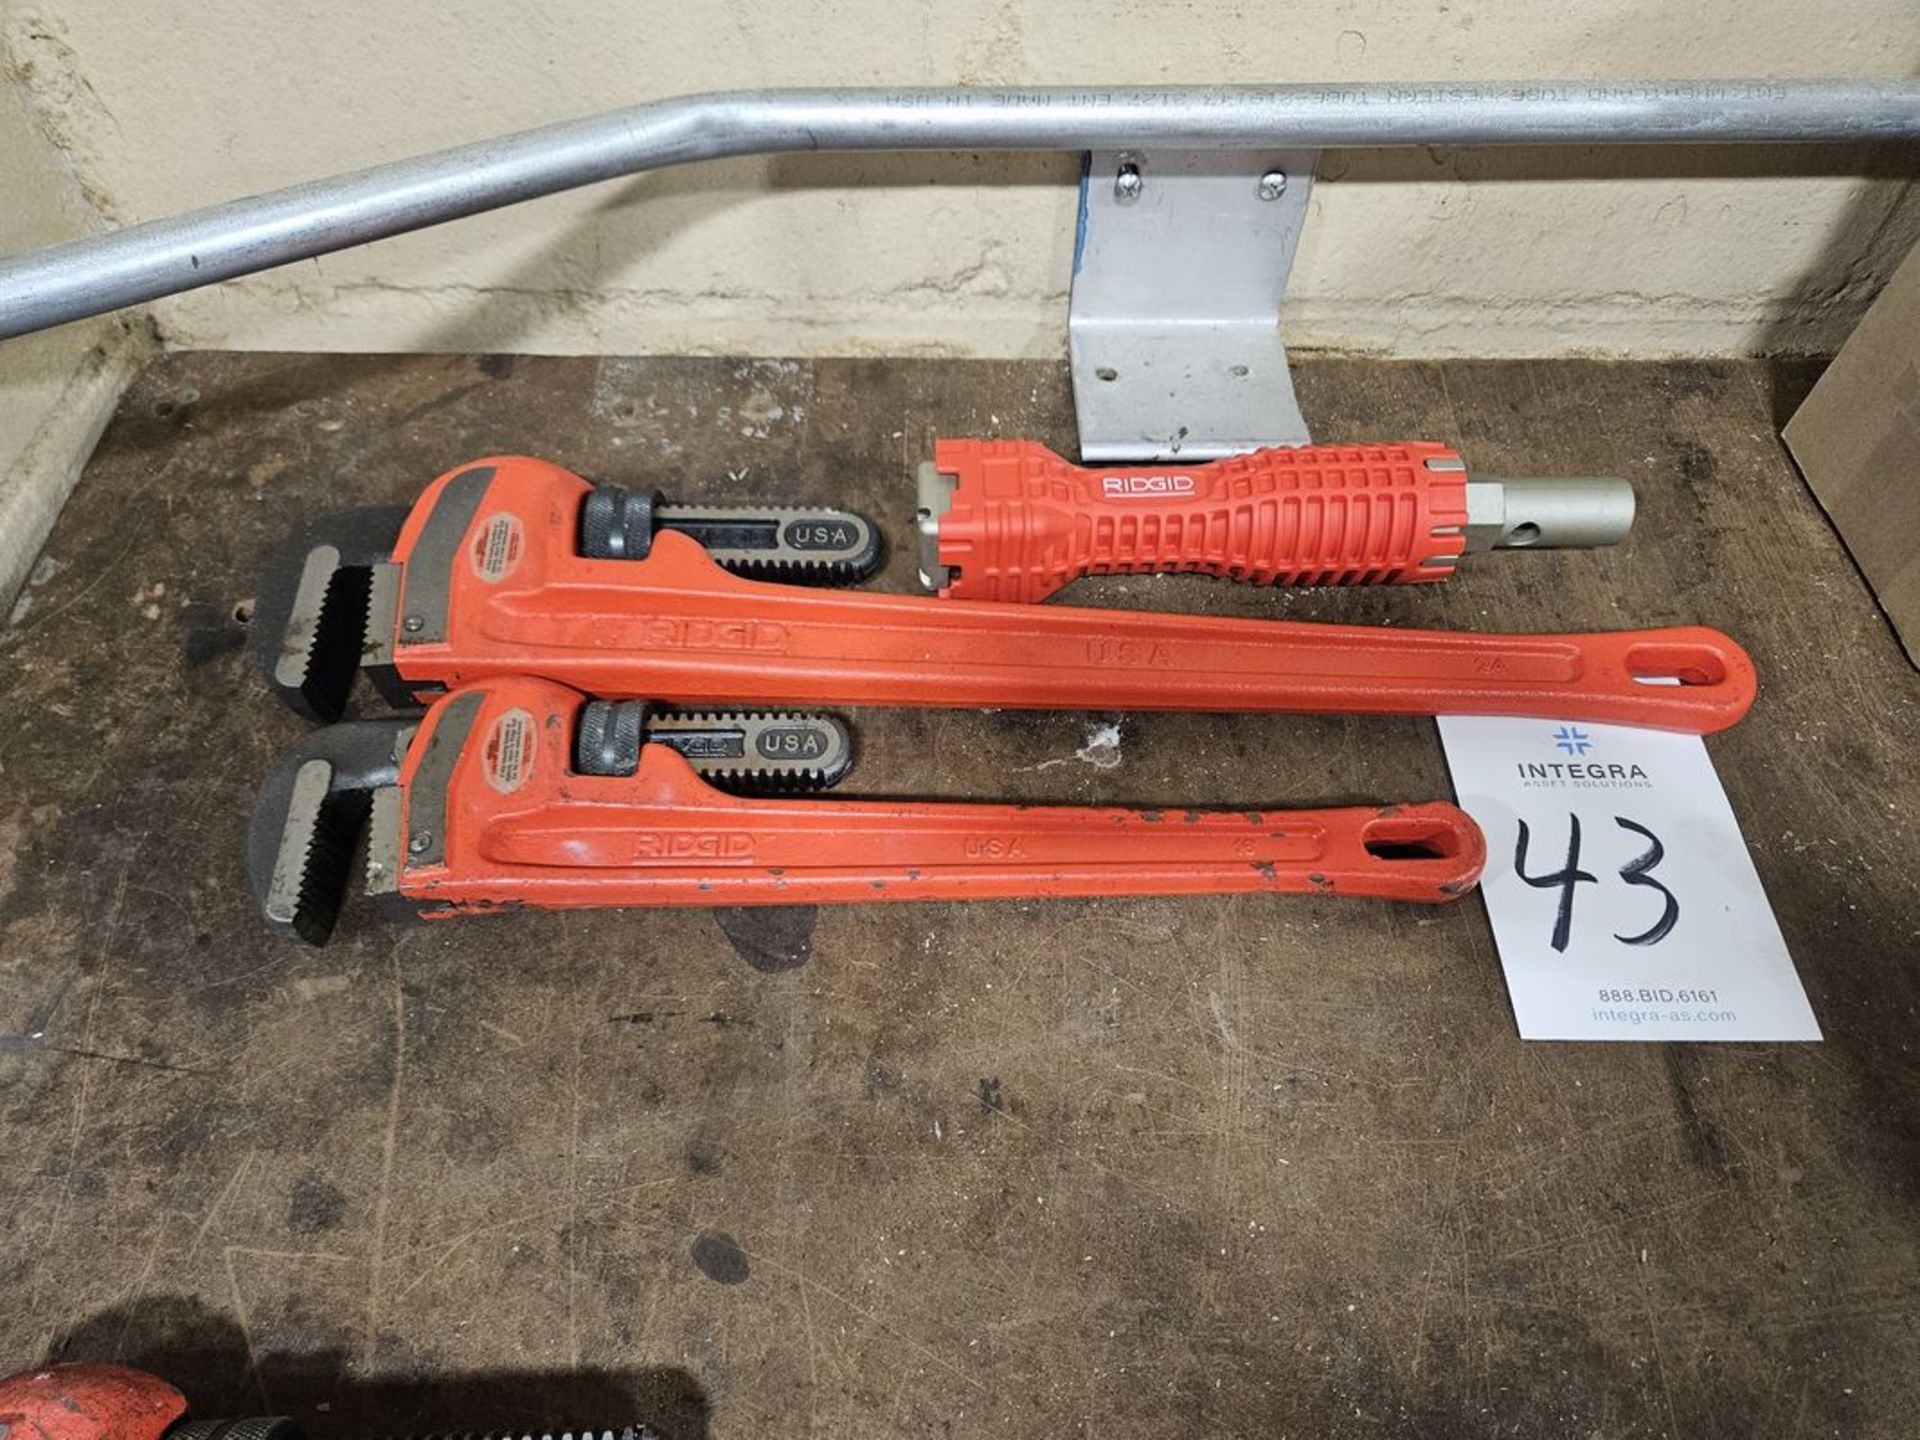 (2) Ridgid Pipe Wrenches, (1) 24", (1) 18" w/ Faucet Wrench